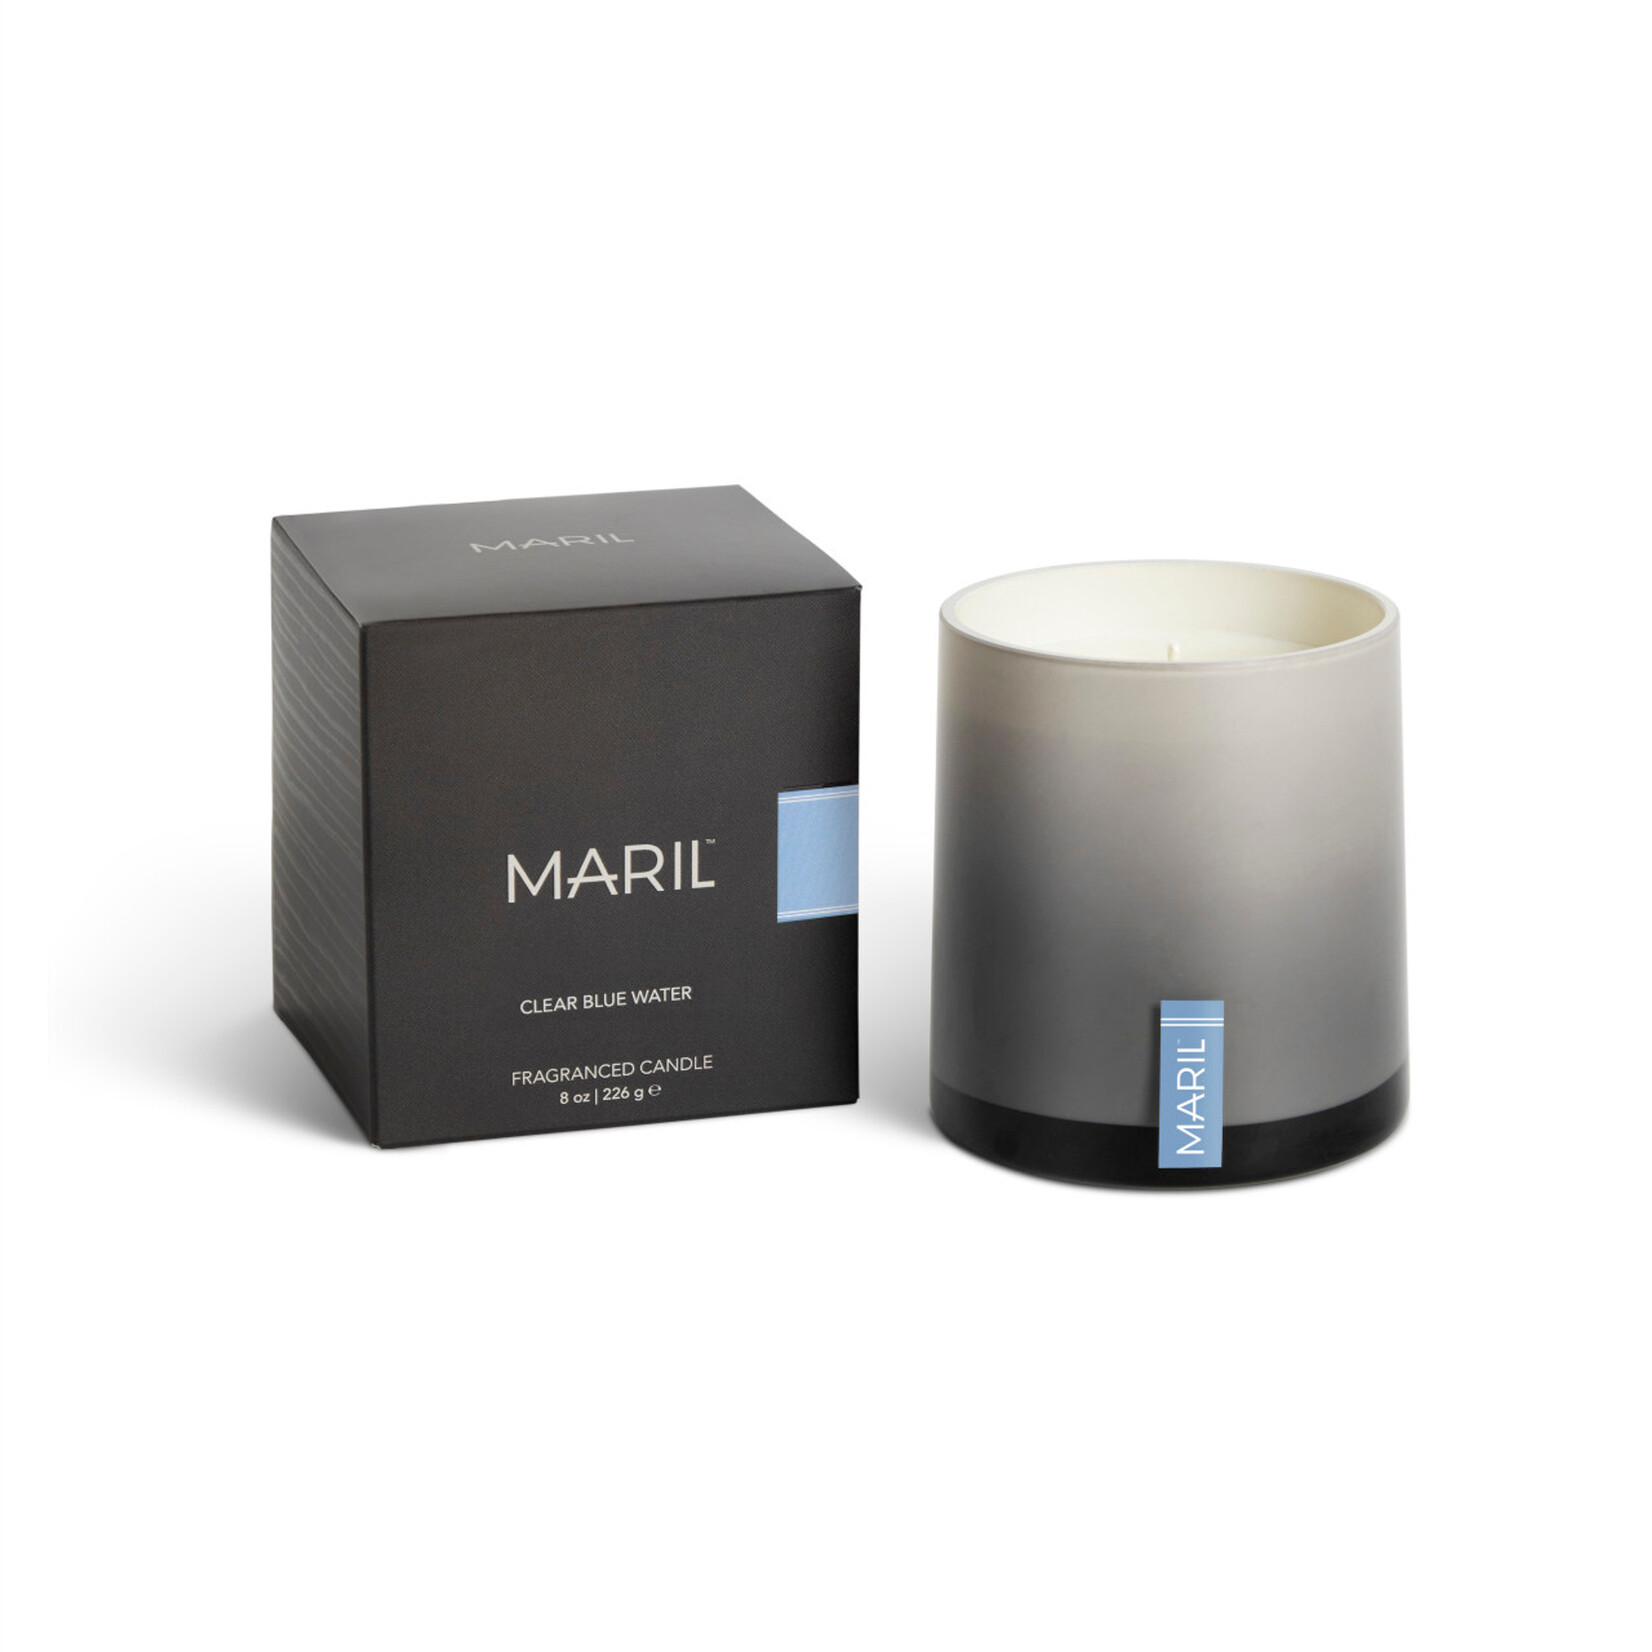 Maril Maril - 8oz Poured Candle - Clear Blue Water